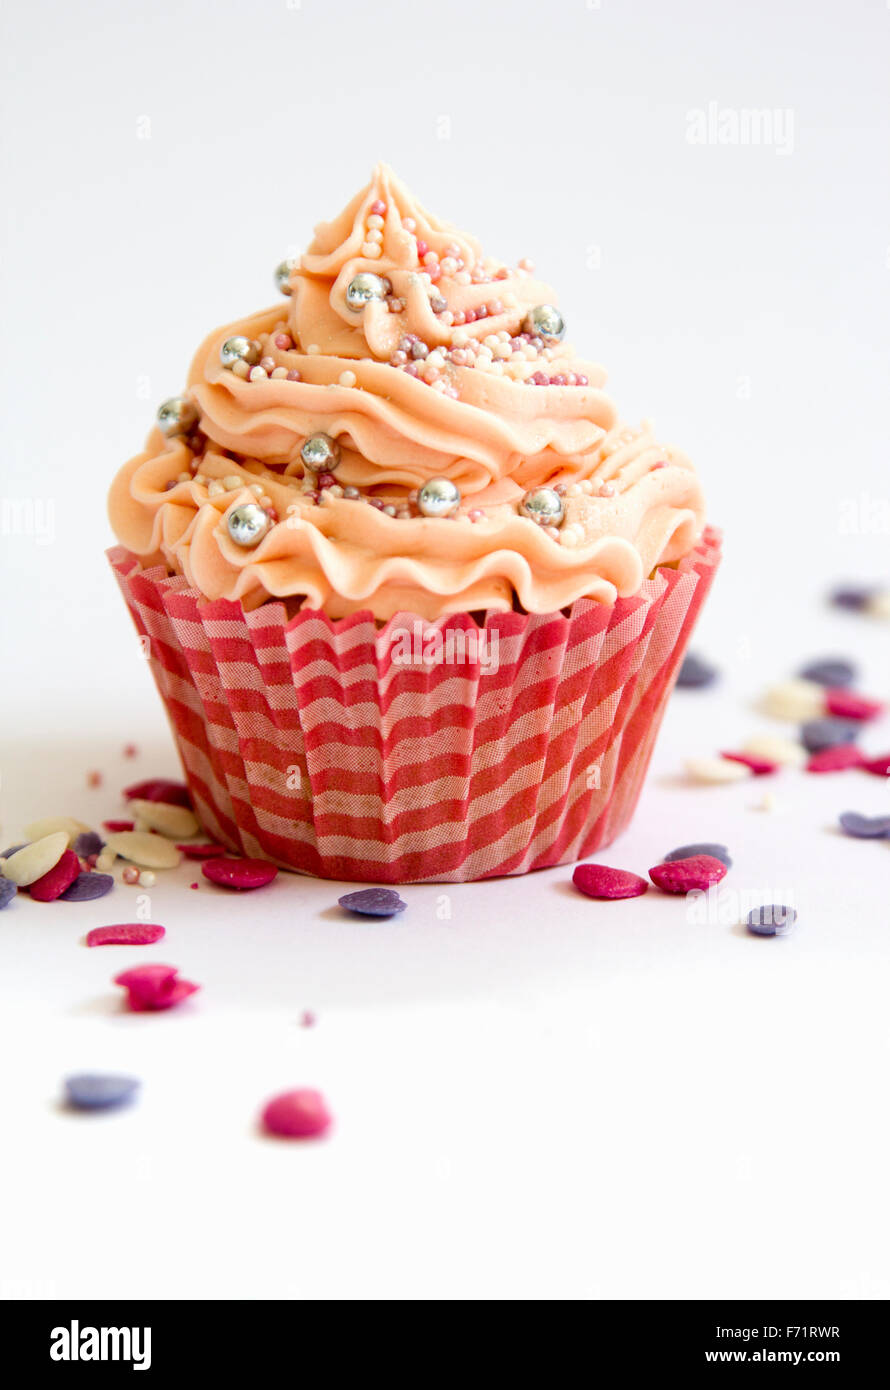 Single pink cupcake with assorted sprinkles Stock Photo